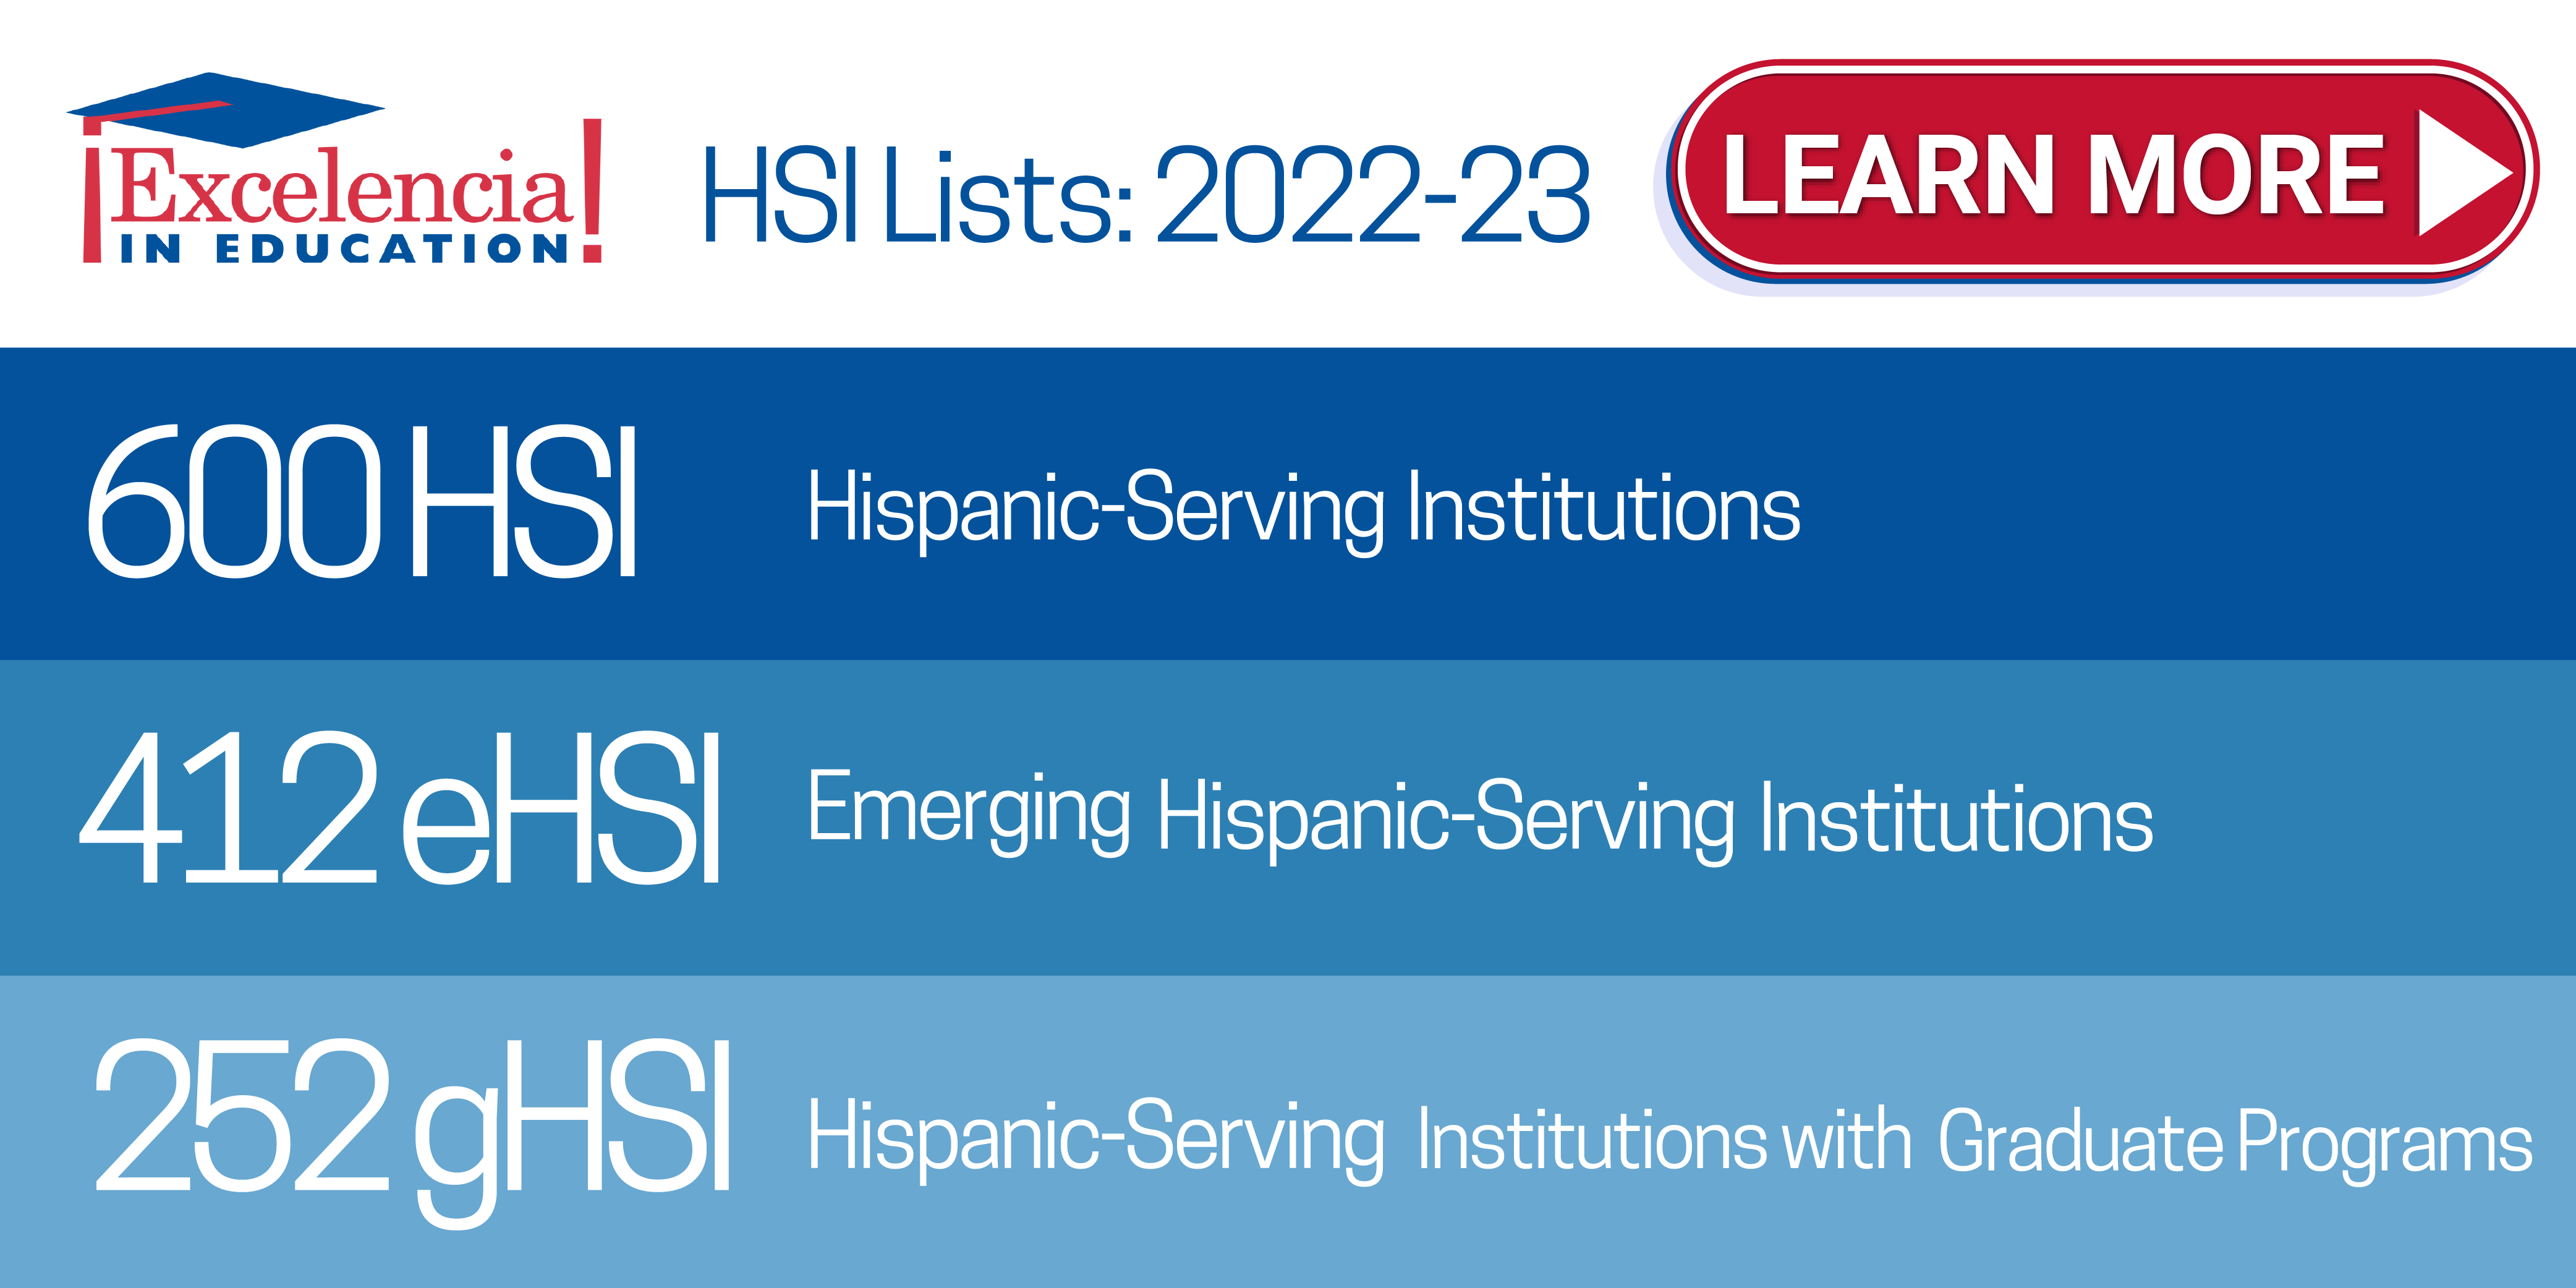 HSI Lists: 2022-23 graphic, including 600 HSIs, 412 eHSIs, and 252 gHSIs with "Learn more" Button